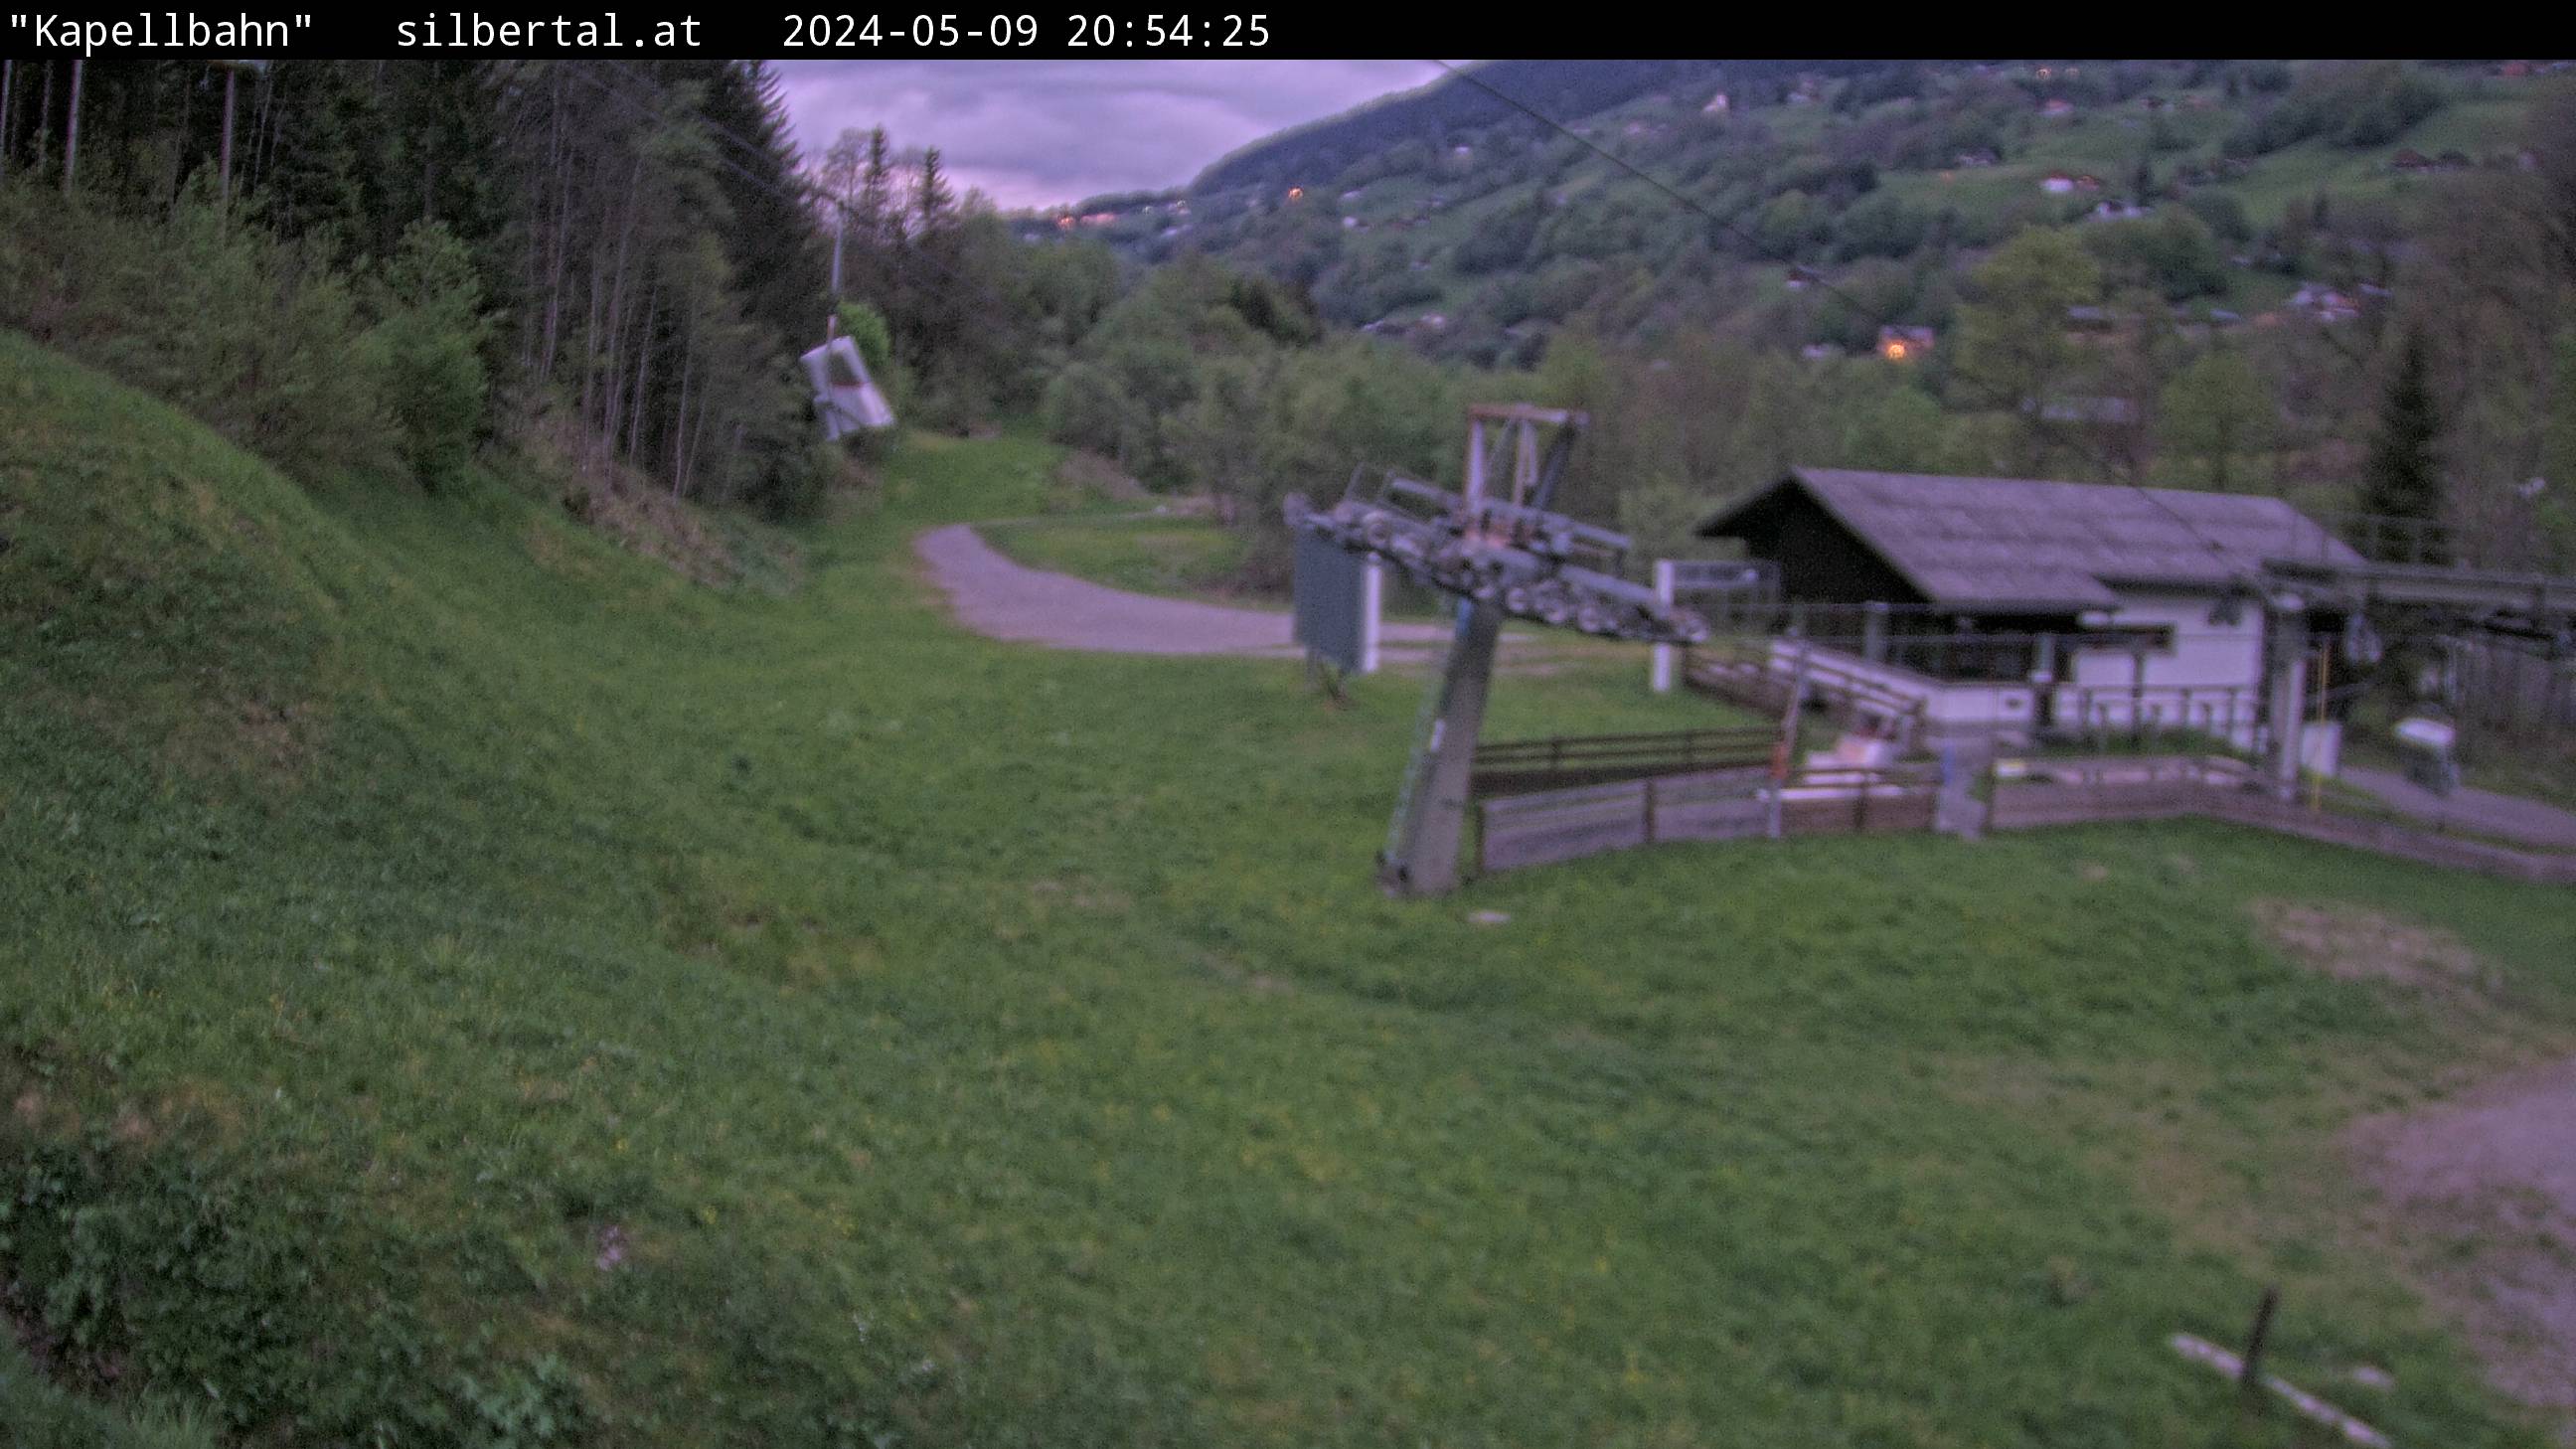 The webcam with this live image shows the Kapellbahn from Silbertal (http://www.silbertal.at). 